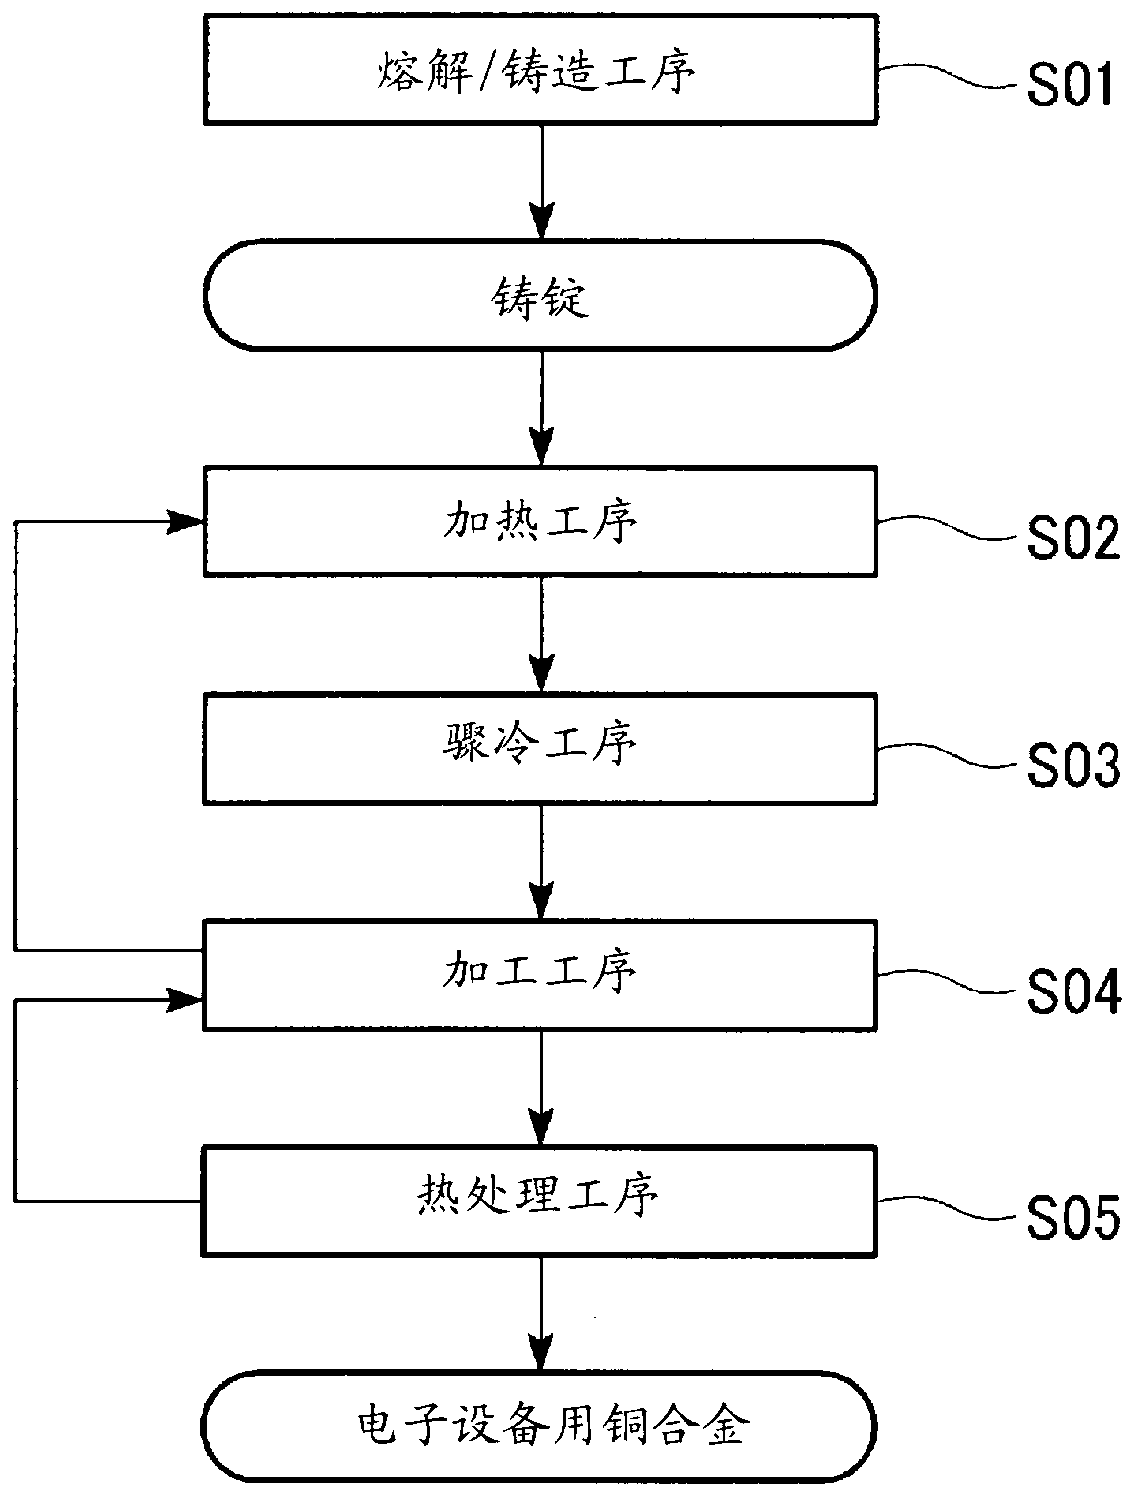 Copper alloy for electronic devices, method for producing copper alloy for electronic devices, and copper alloy rolled material for electronic devices